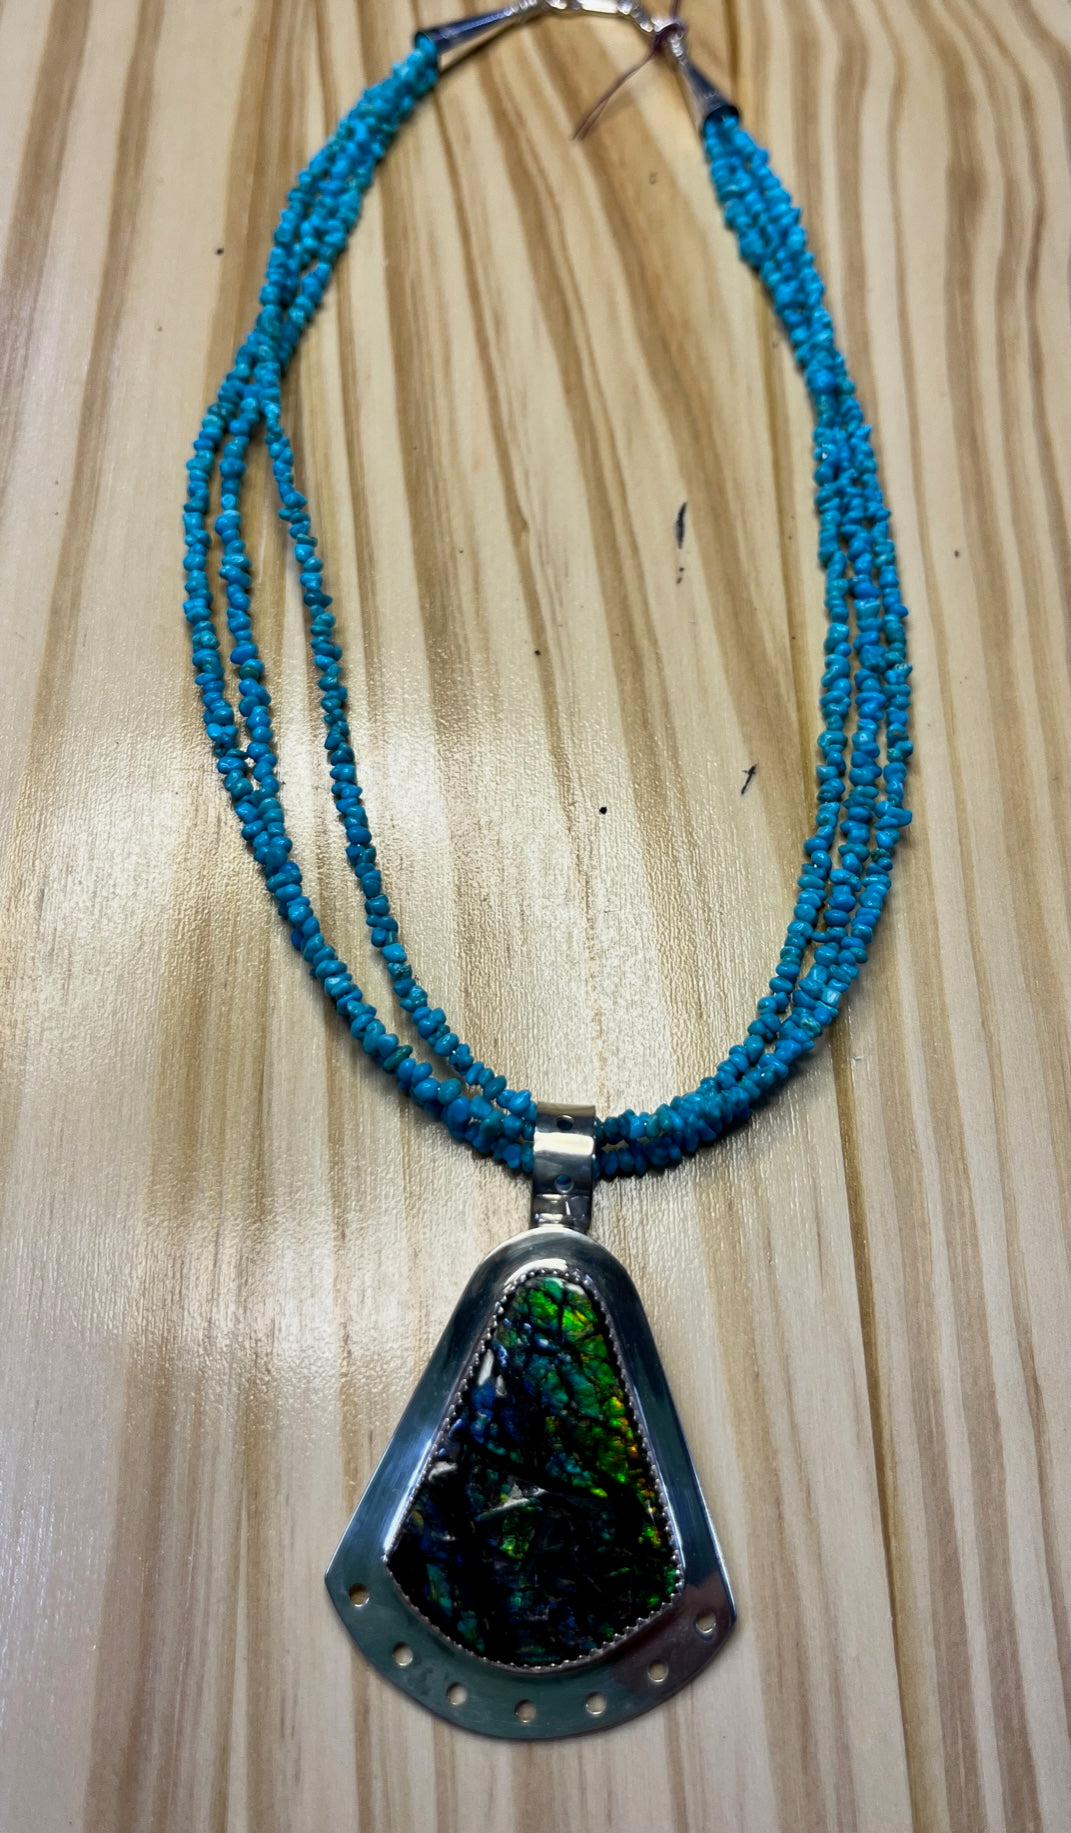 3 Strand Ammolite and Turquoise Necklace